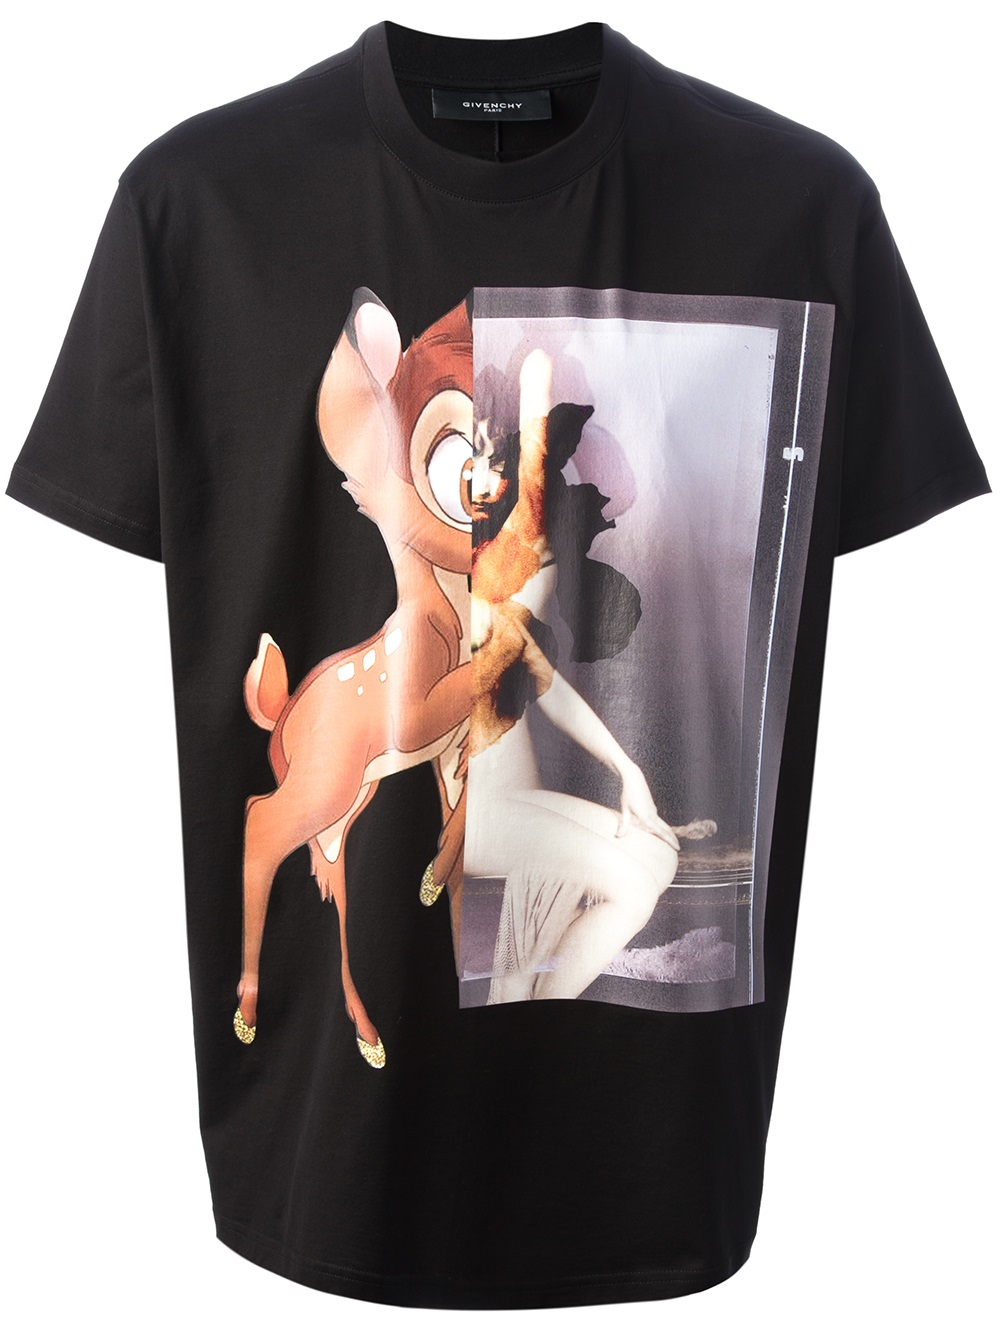 givenchy バンビ Tシャツ | www.jarussi.com.br